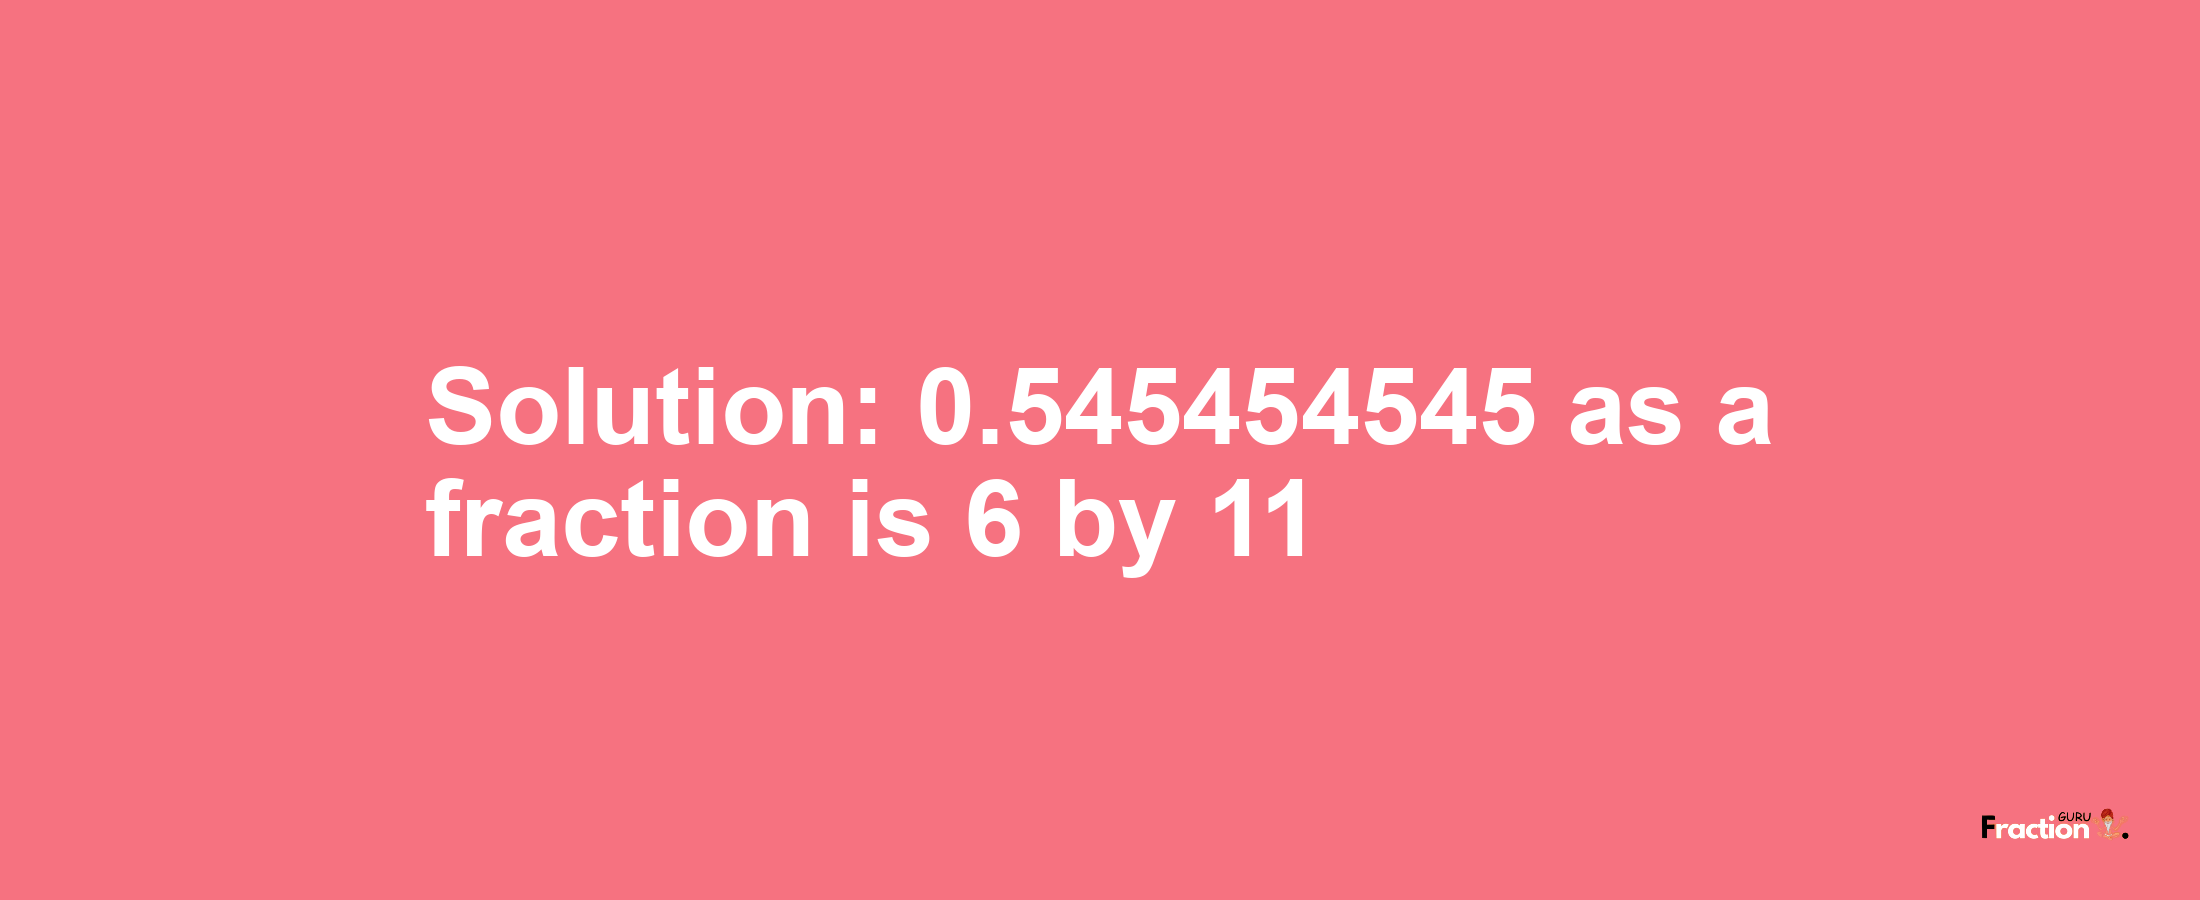 Solution:0.545454545 as a fraction is 6/11